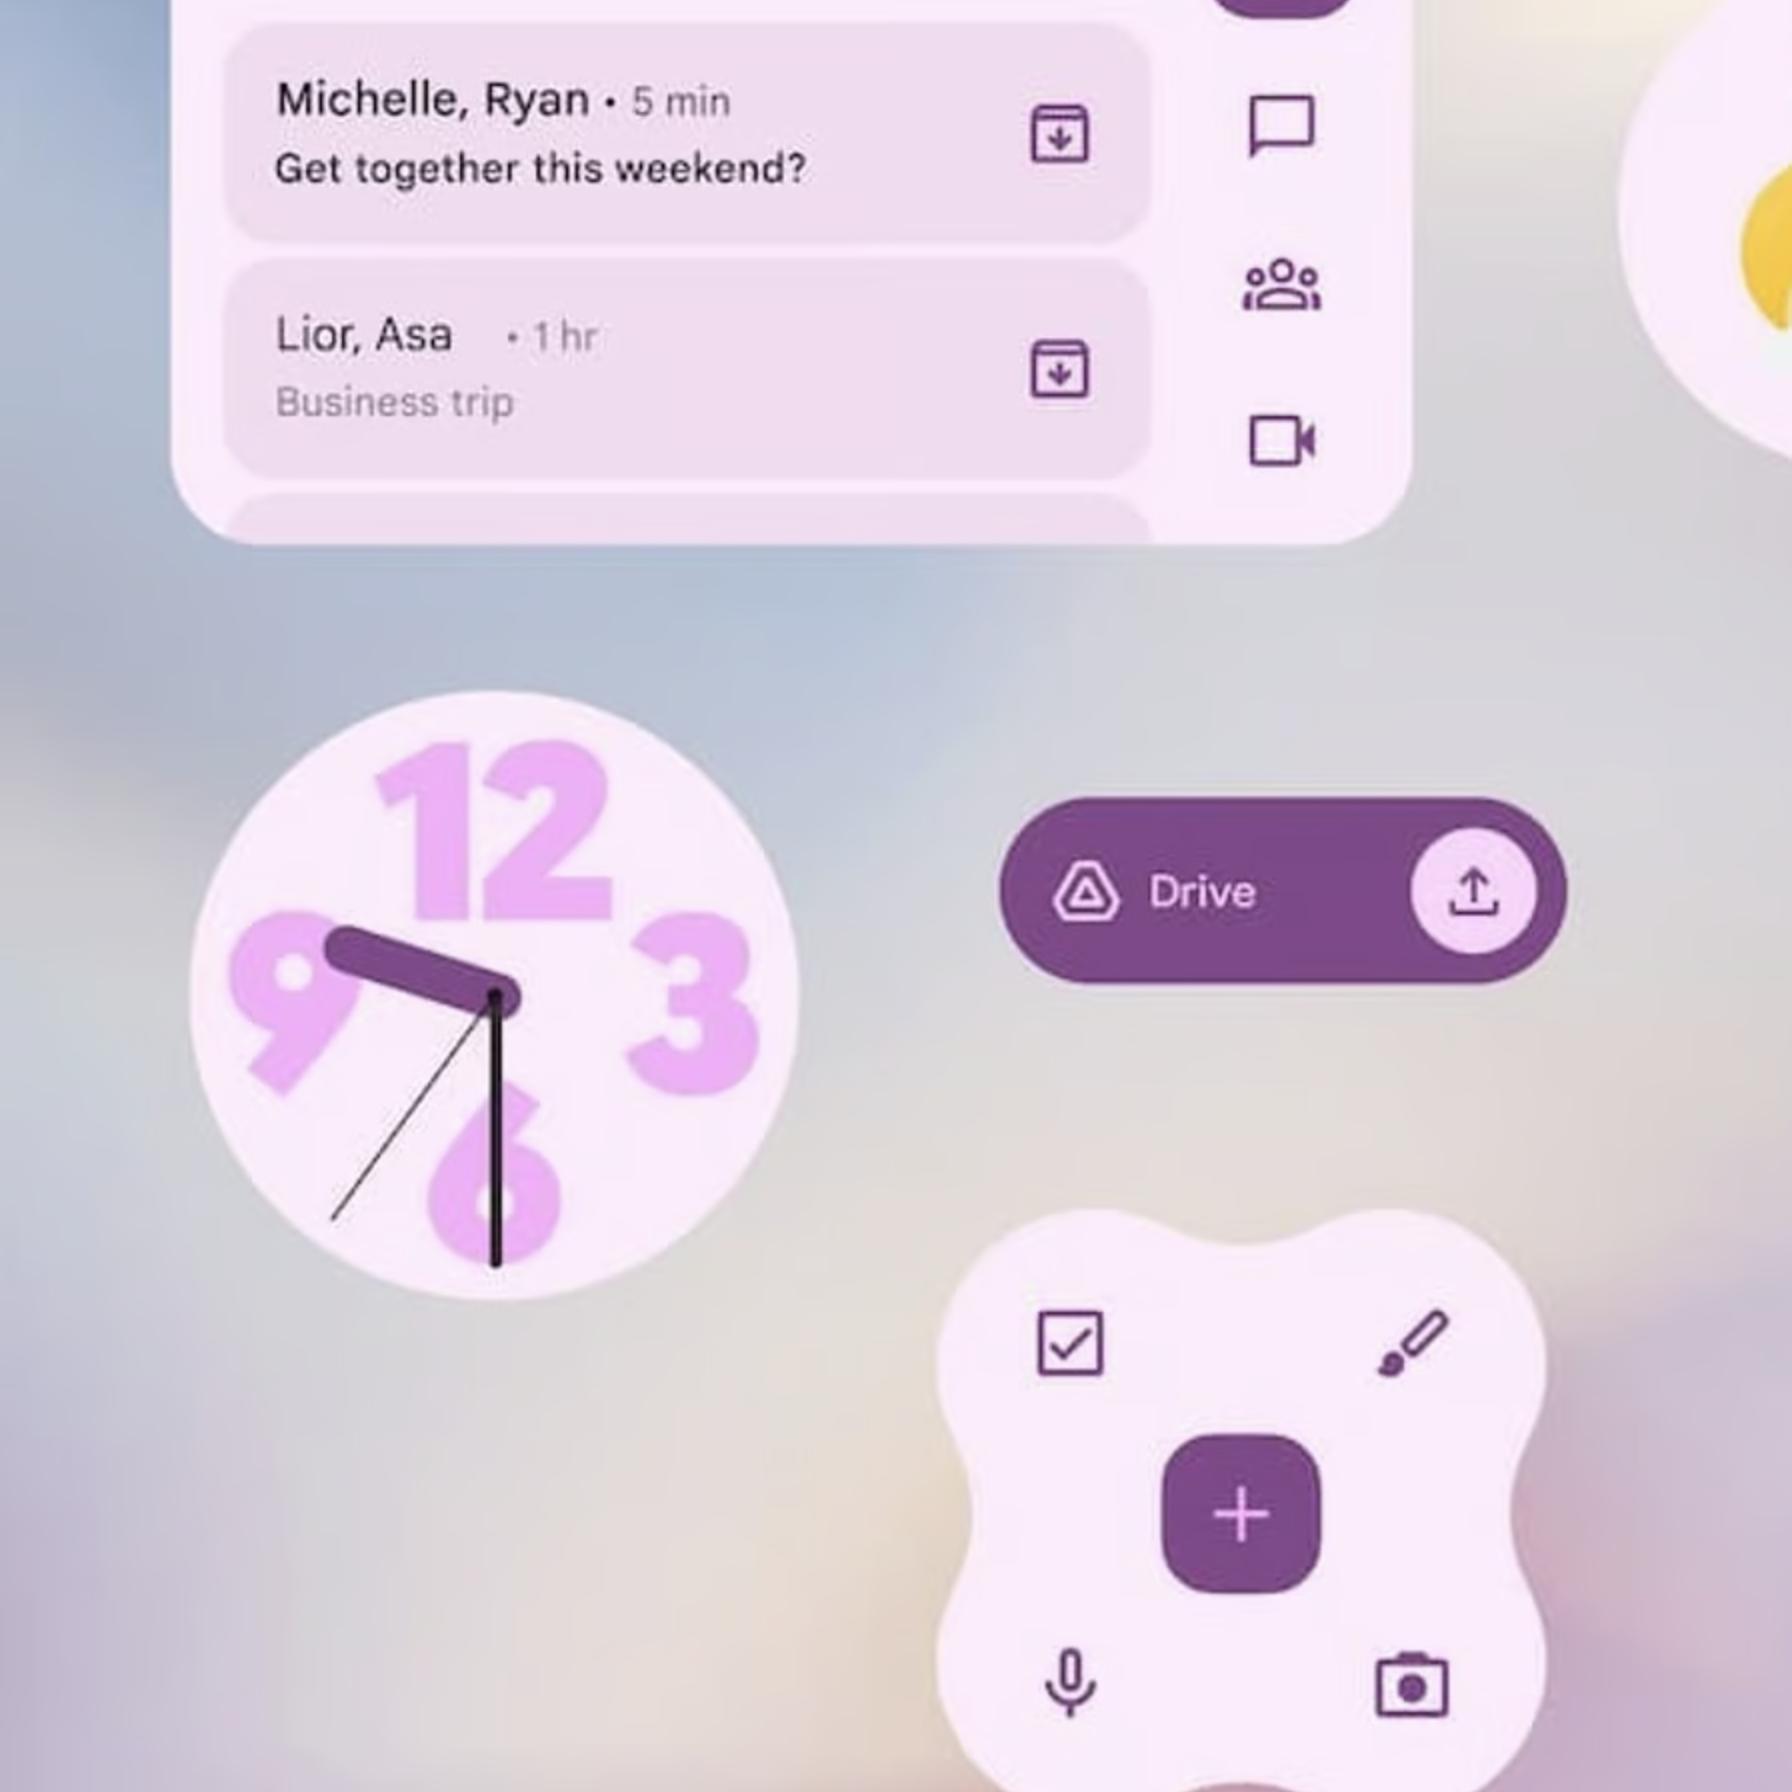 A display of various Material Design components: notifications, a clock, and some buttons